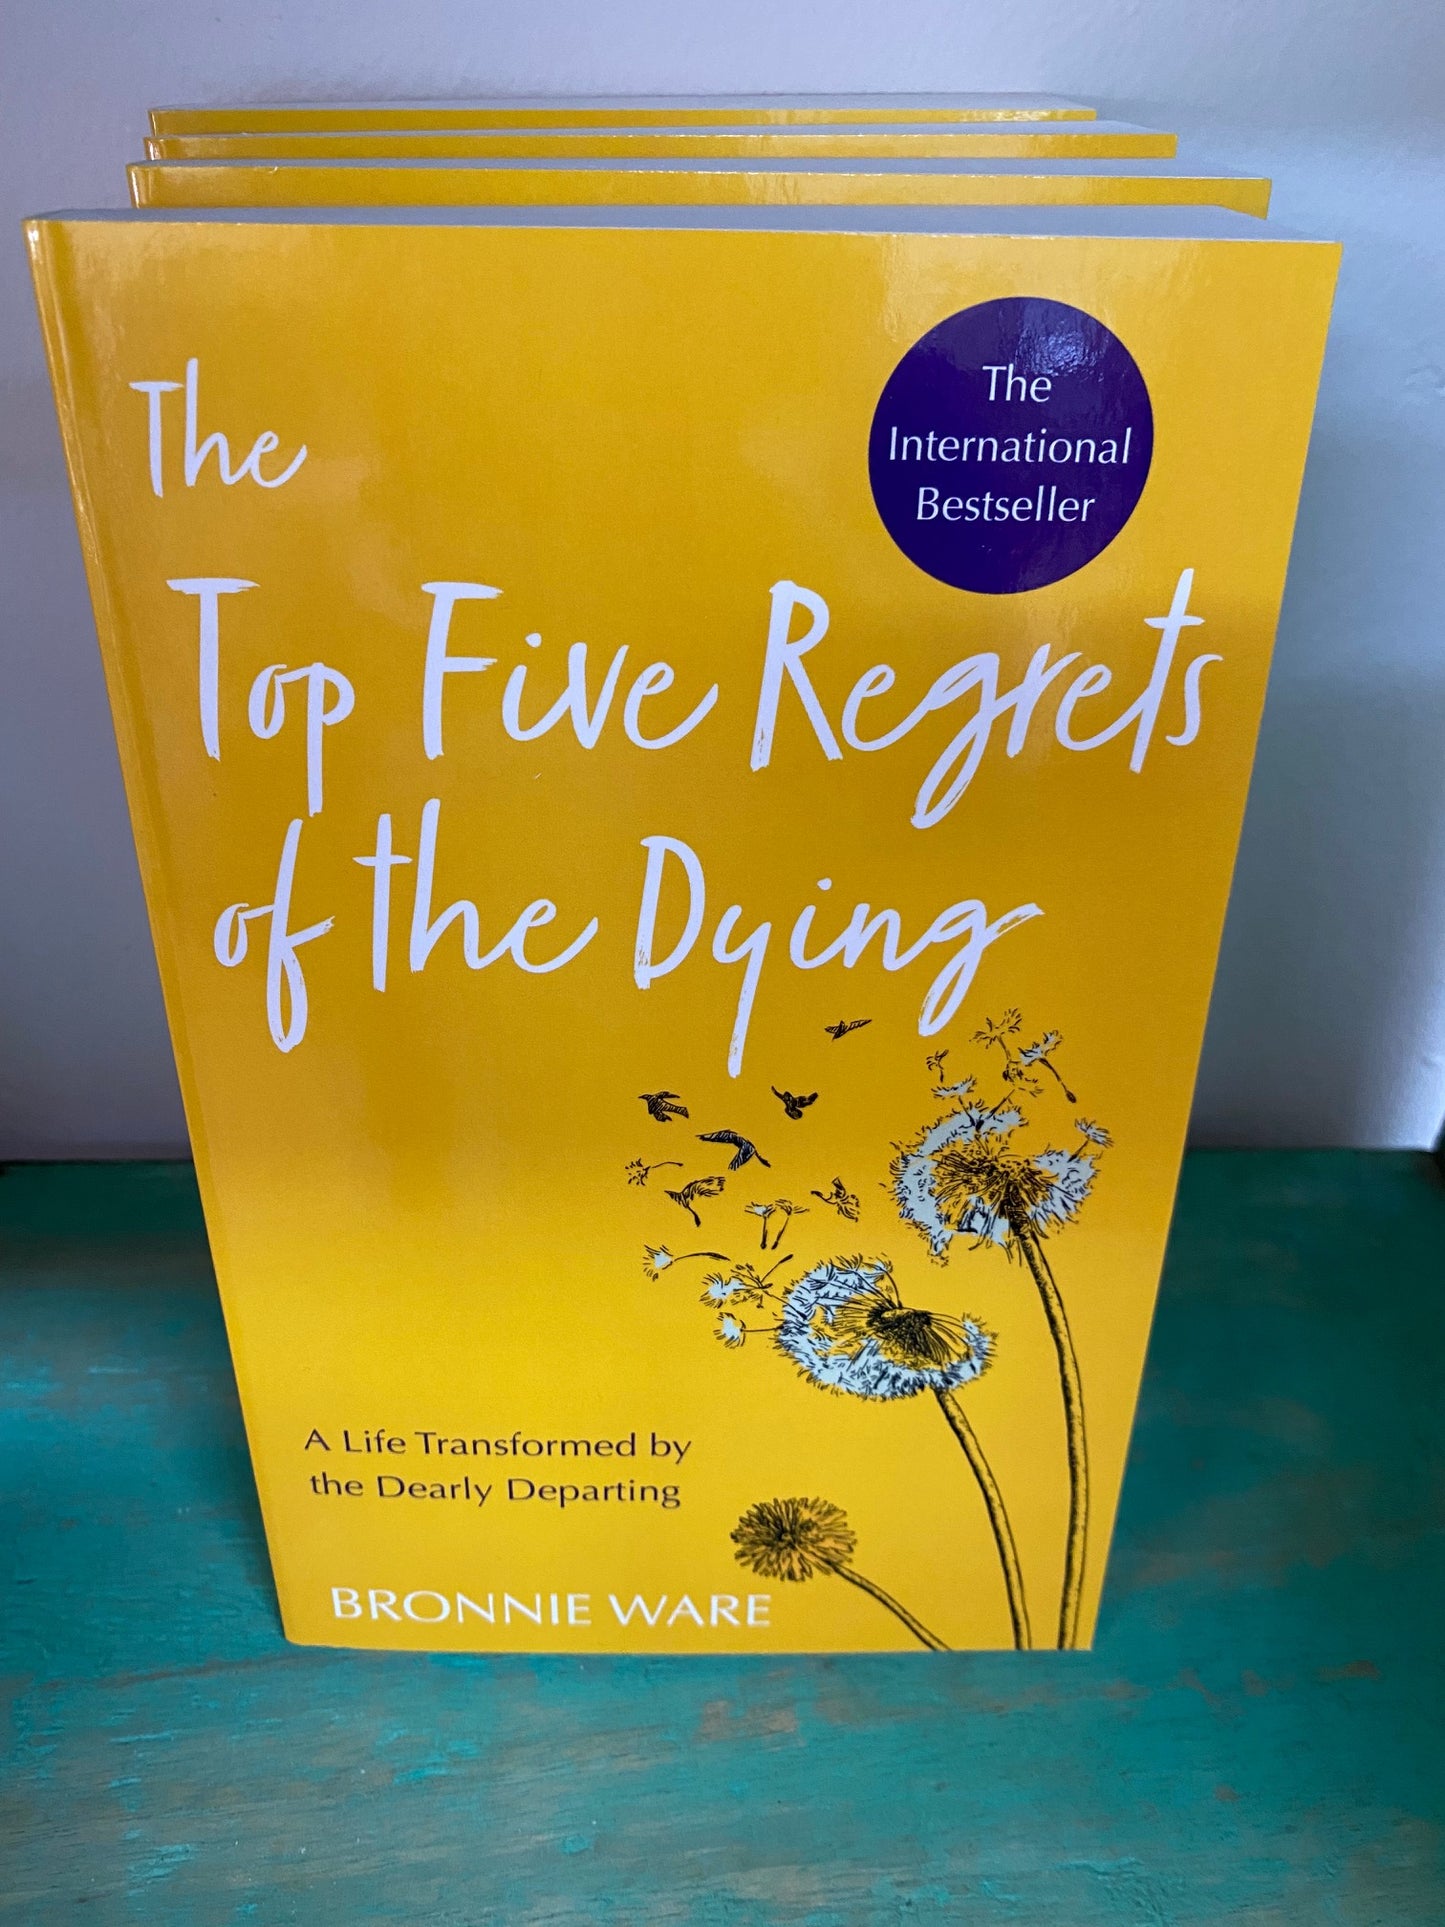 The TOP 5 most common regrets of the dying